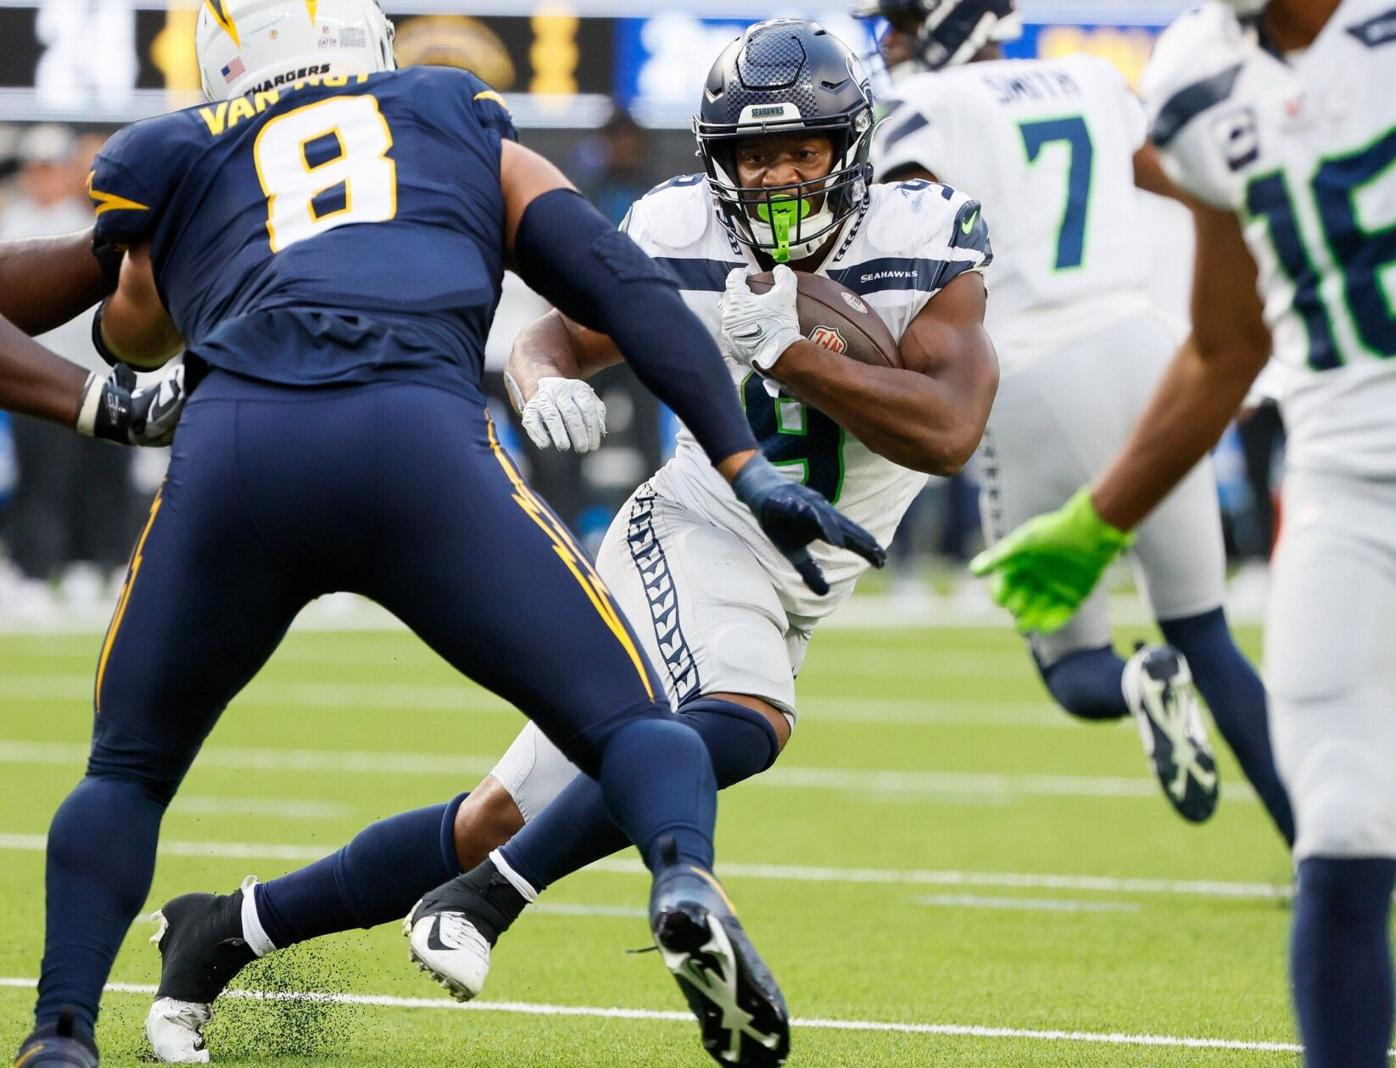 Seahawks' Pete Carroll says Geno Smith 'lucky' to escape serious injury  after 'dangerous' tackle